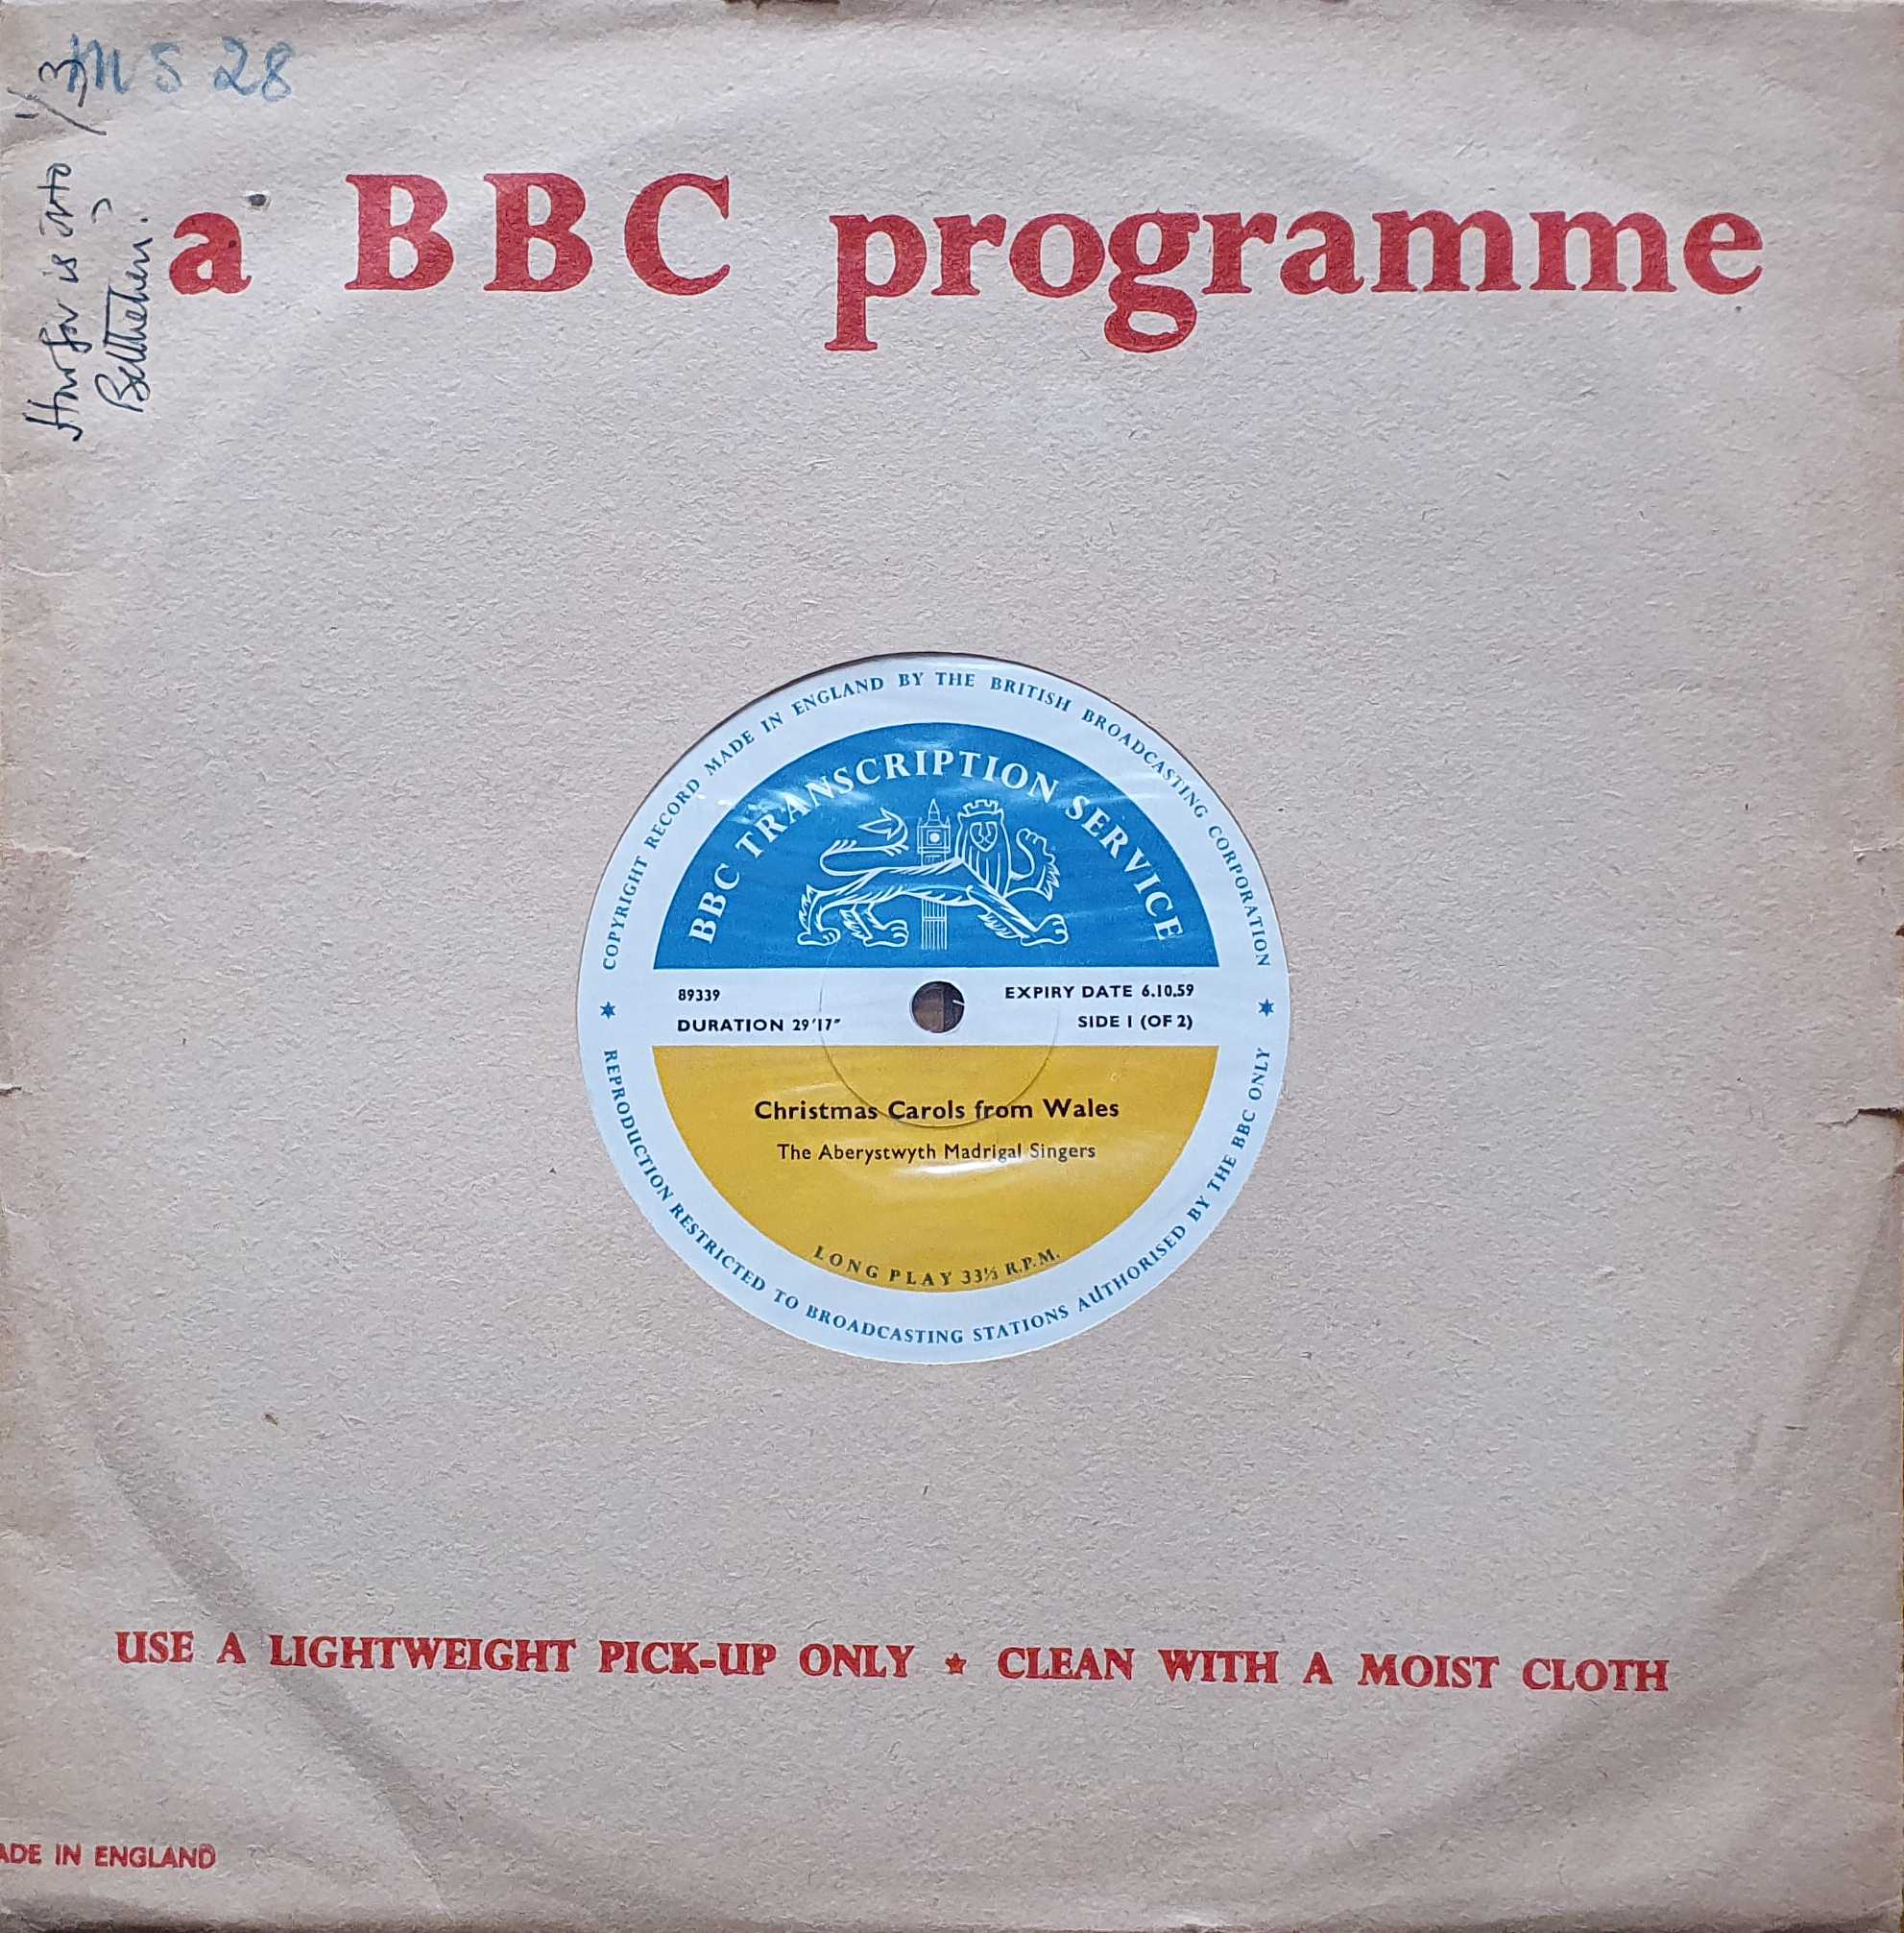 Picture of 89339 Christmas carols from Wales (Side 1 of 2) / How far is it to Bethlehem? (Side 1 of 2) by artist Various from the BBC 10inches - Records and Tapes library